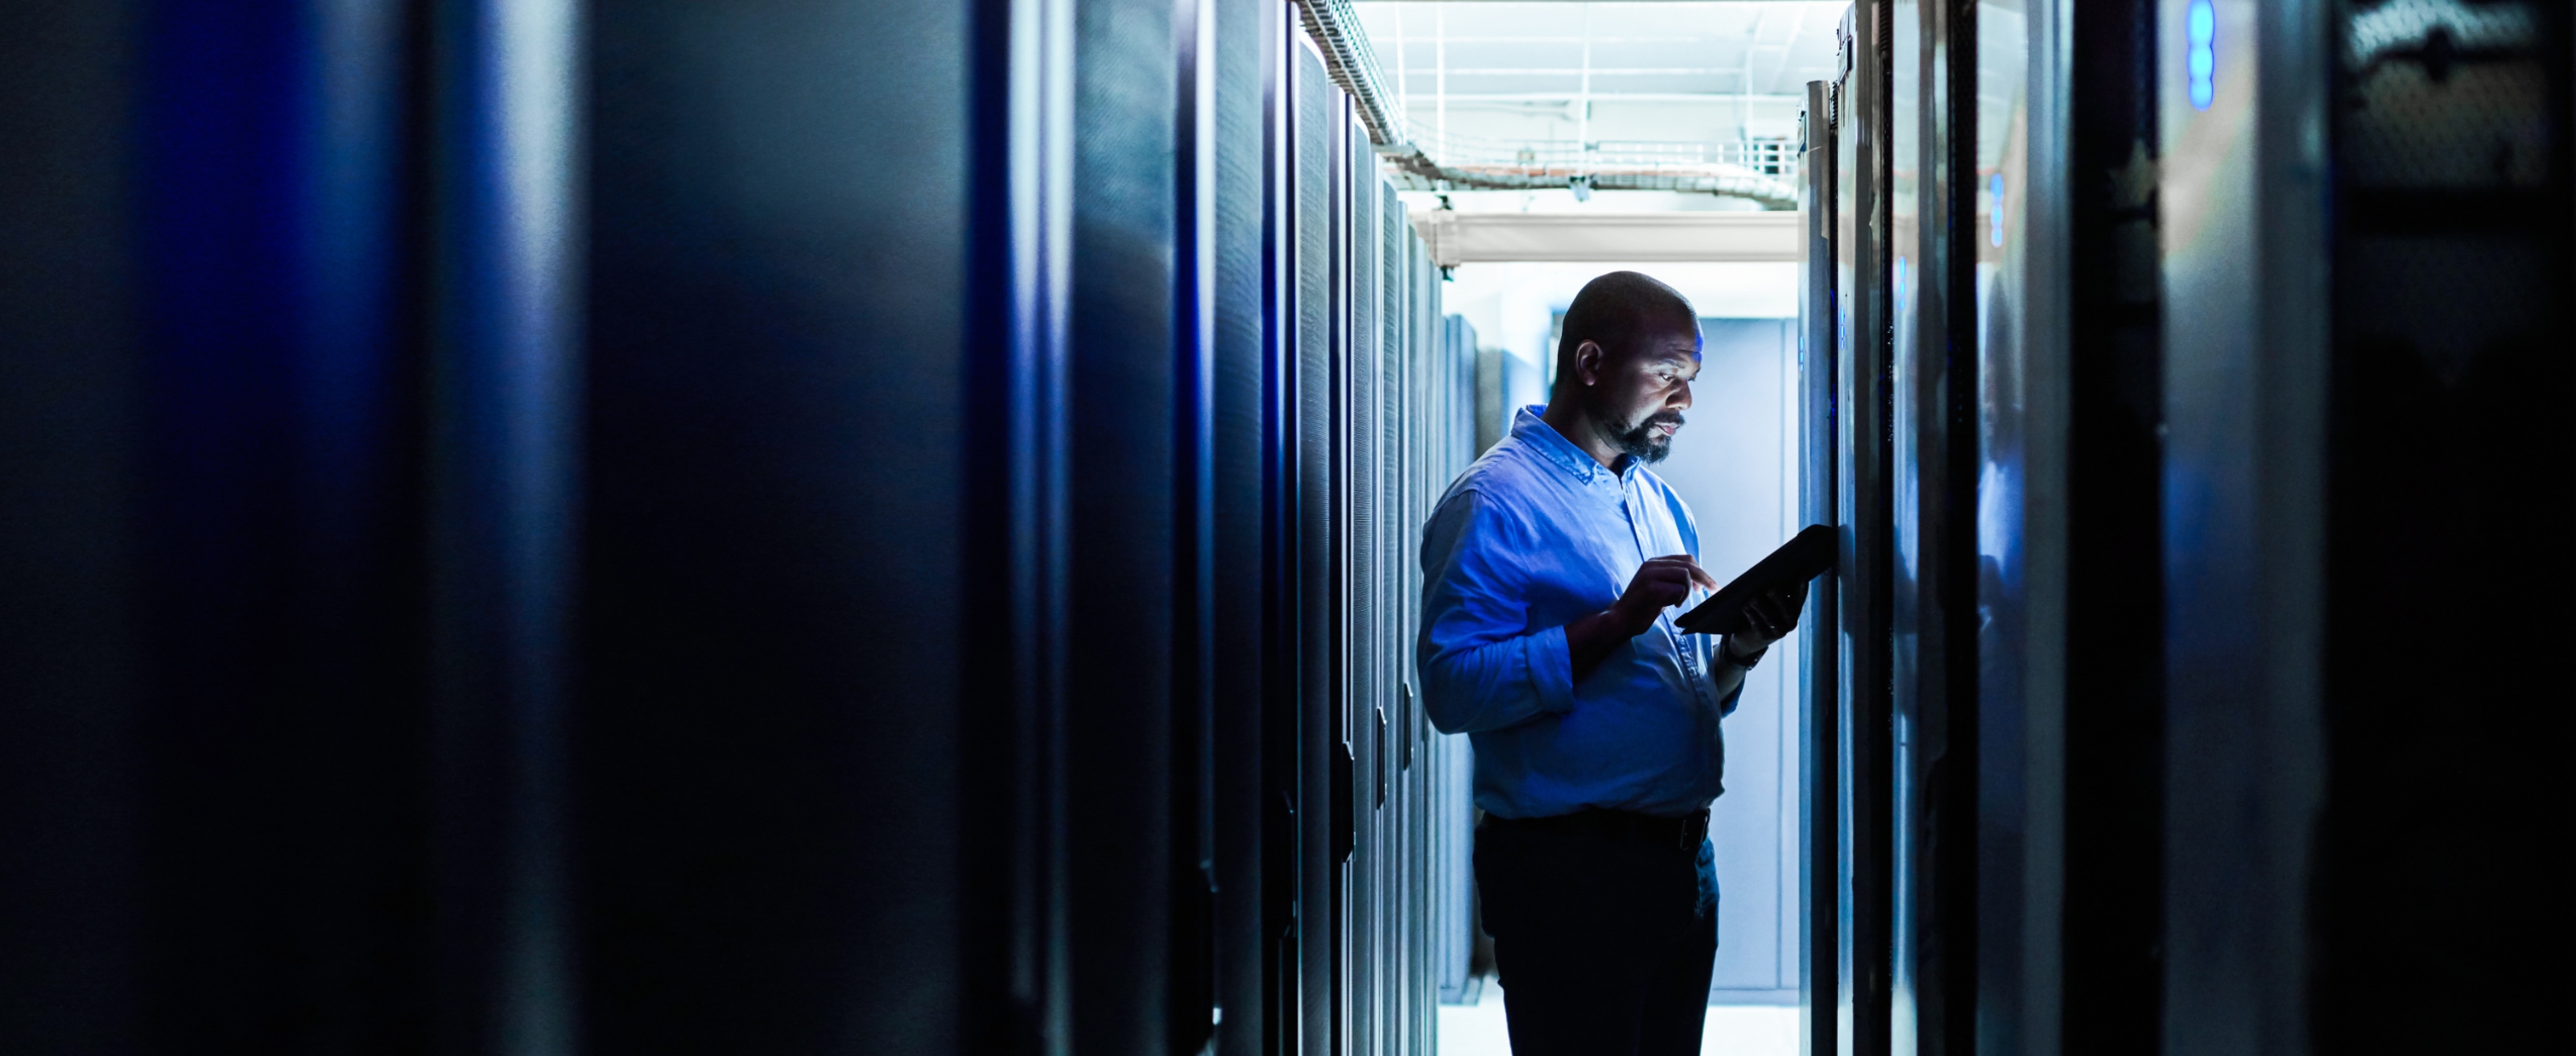 IT worker walking through the enterprise data centre checking network dashboards on a tablet.